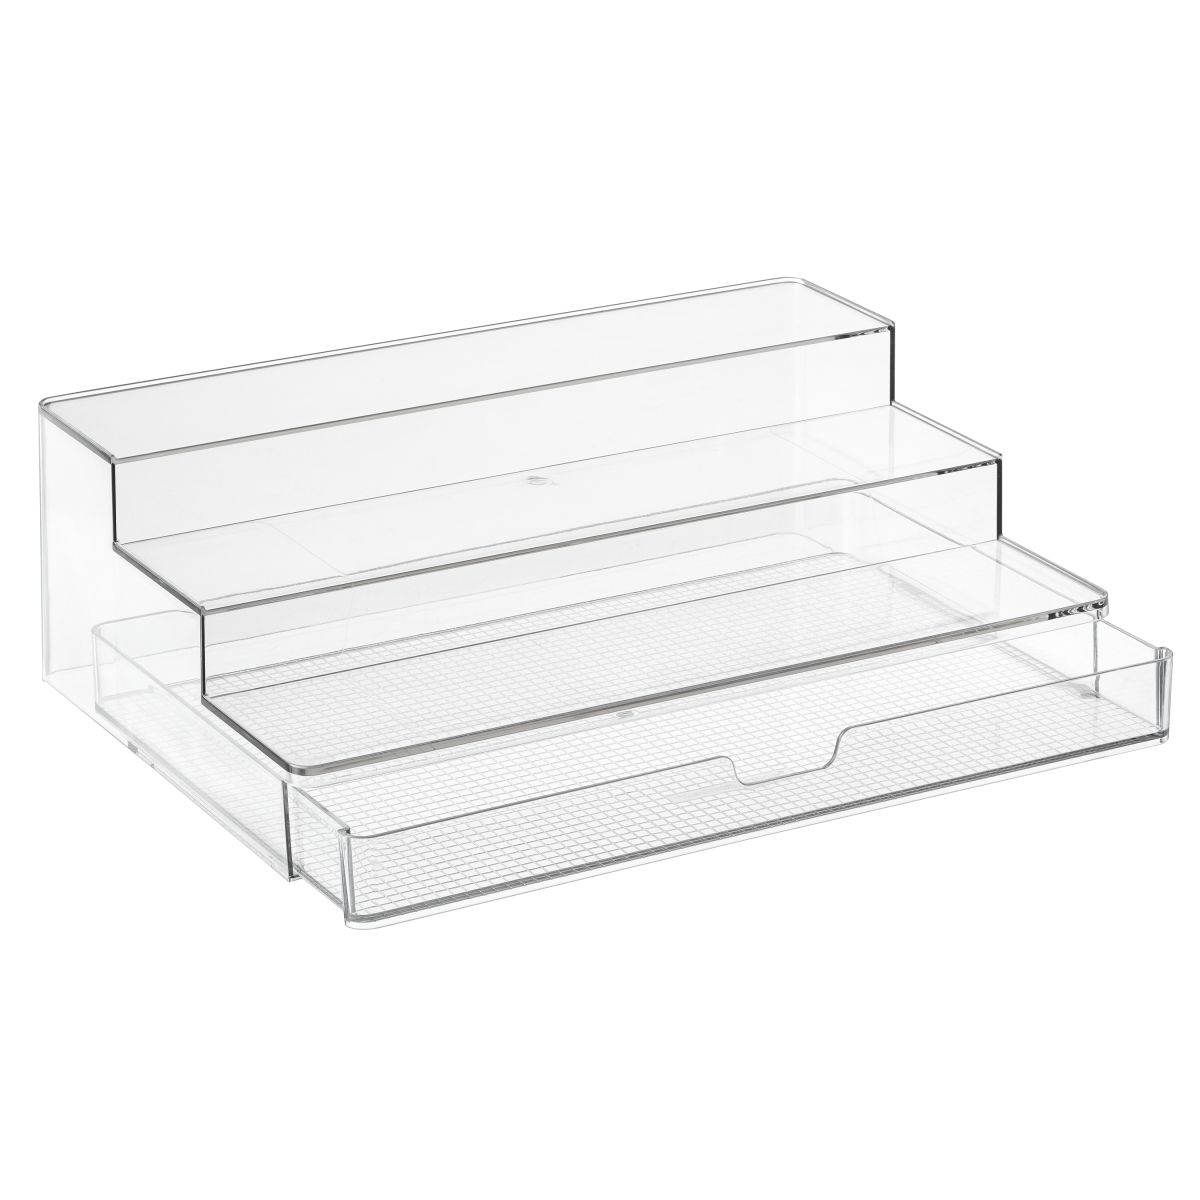 Everything Organizer Large 3-Tier Organizer with Drawer ClearSKU:100900774.84 Reviews | The Container Store